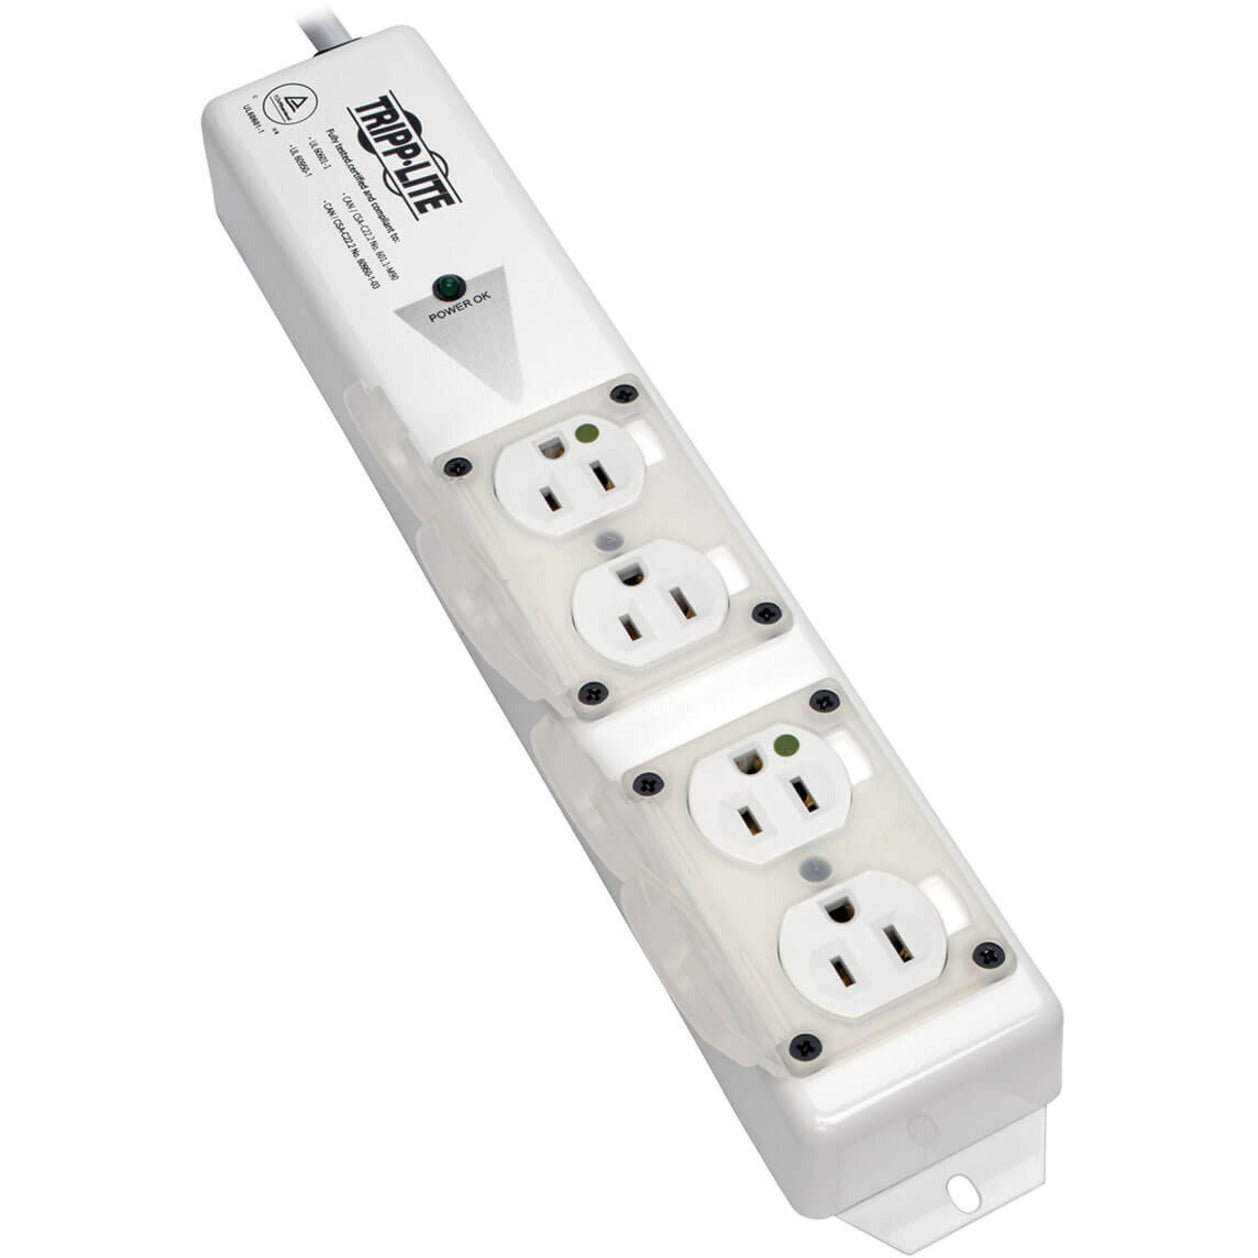 Tripp Lite PS-406-HGULTRA 4-Outlet Power Strip, UL Listed Certification, 120V AC, 15A, 6ft Cord, Metal Construction